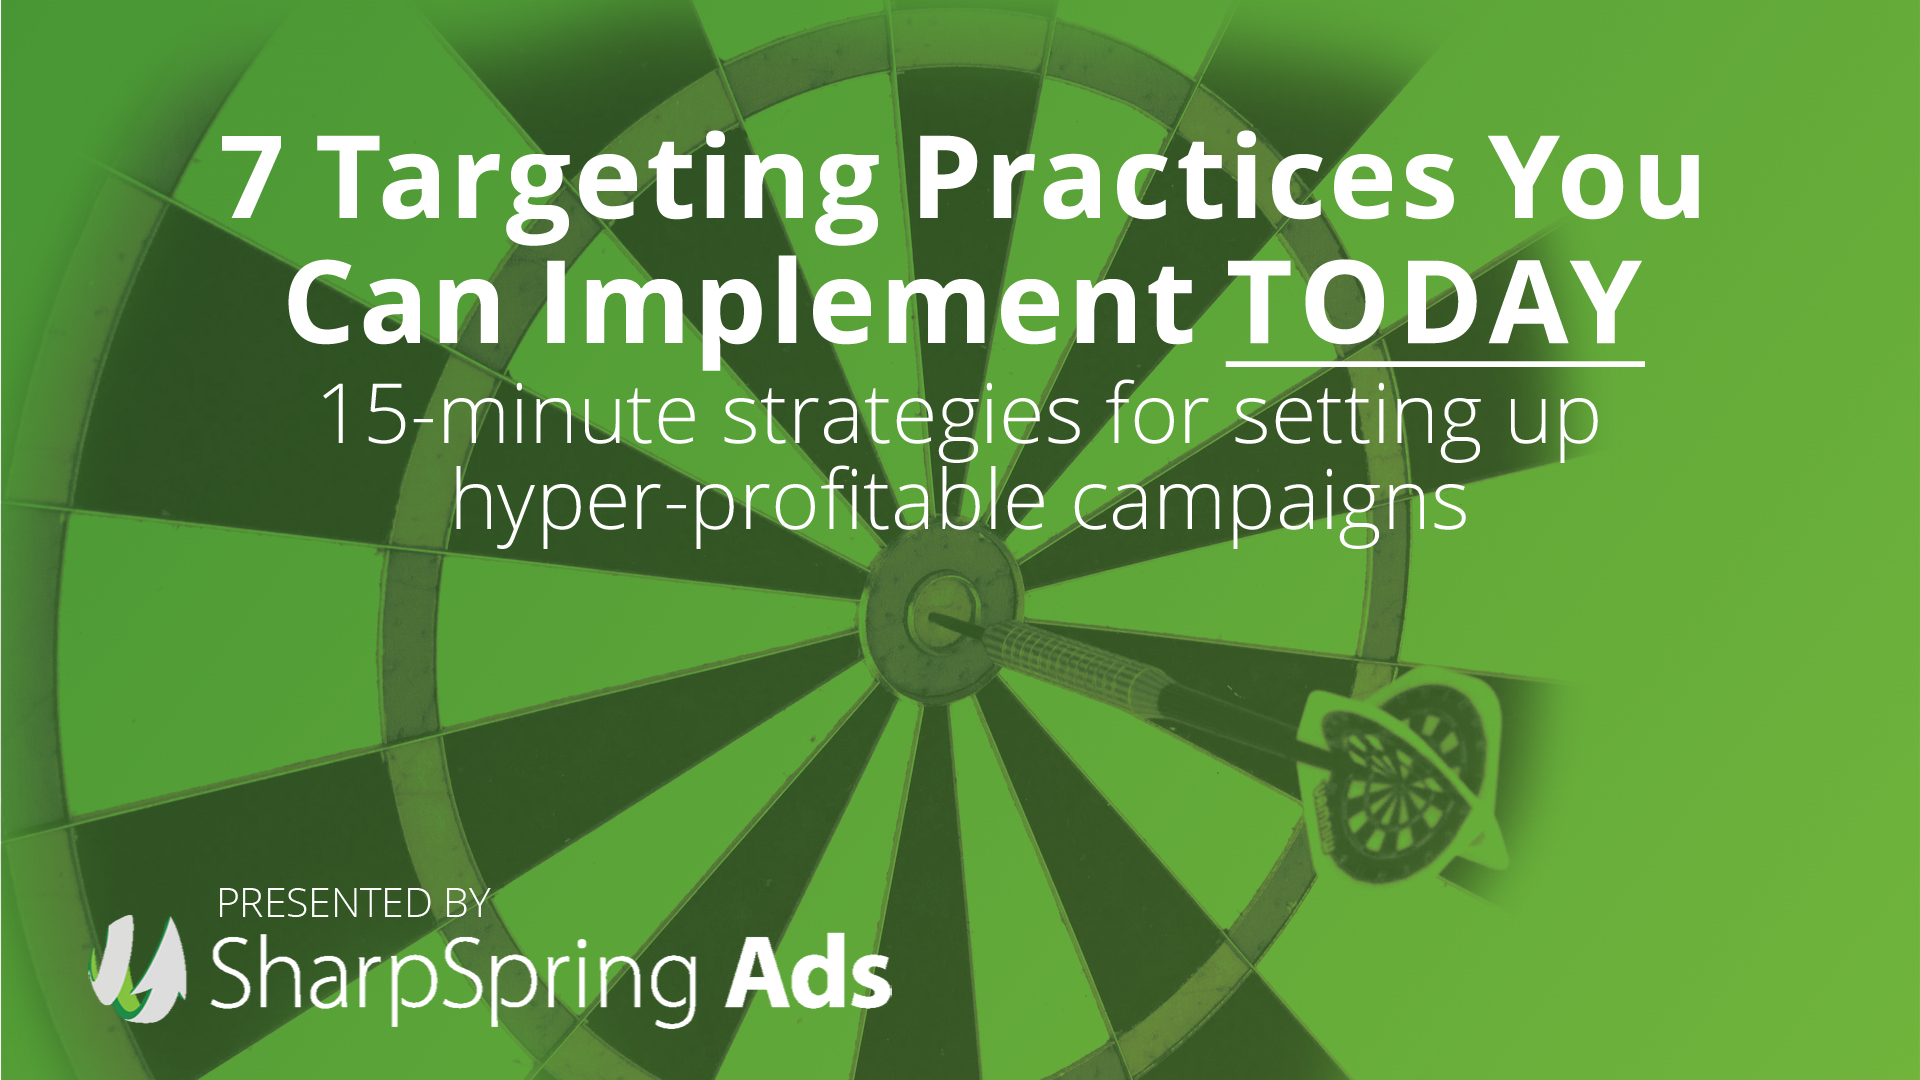 7 Targeting Practices You Can Implement Today